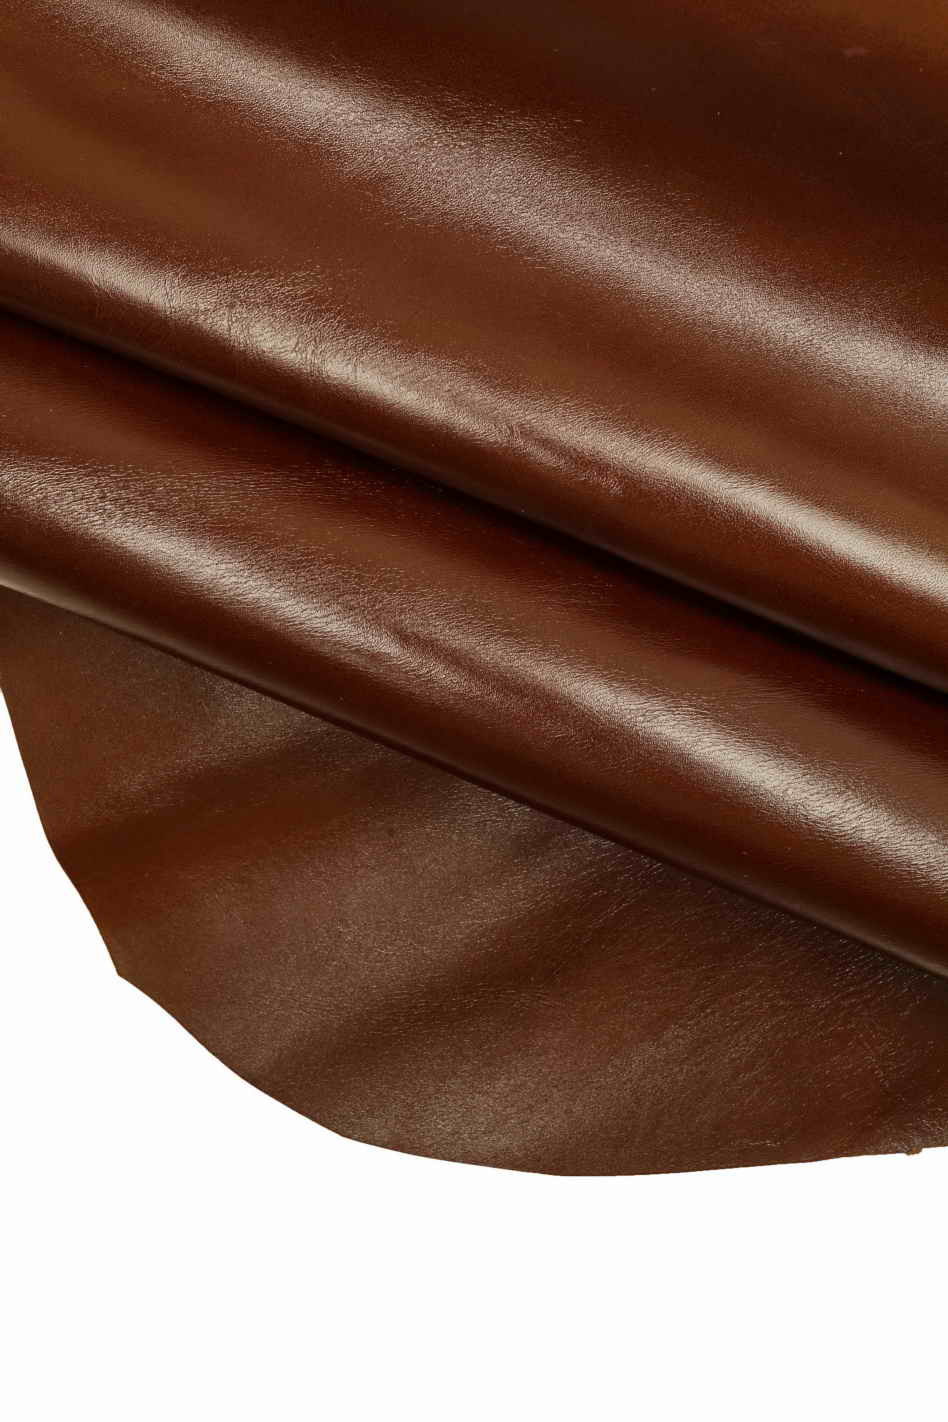 Italian leather, smooth brown calfskin with nuances of color, light creased  effect, shiny, vintage / sporty look